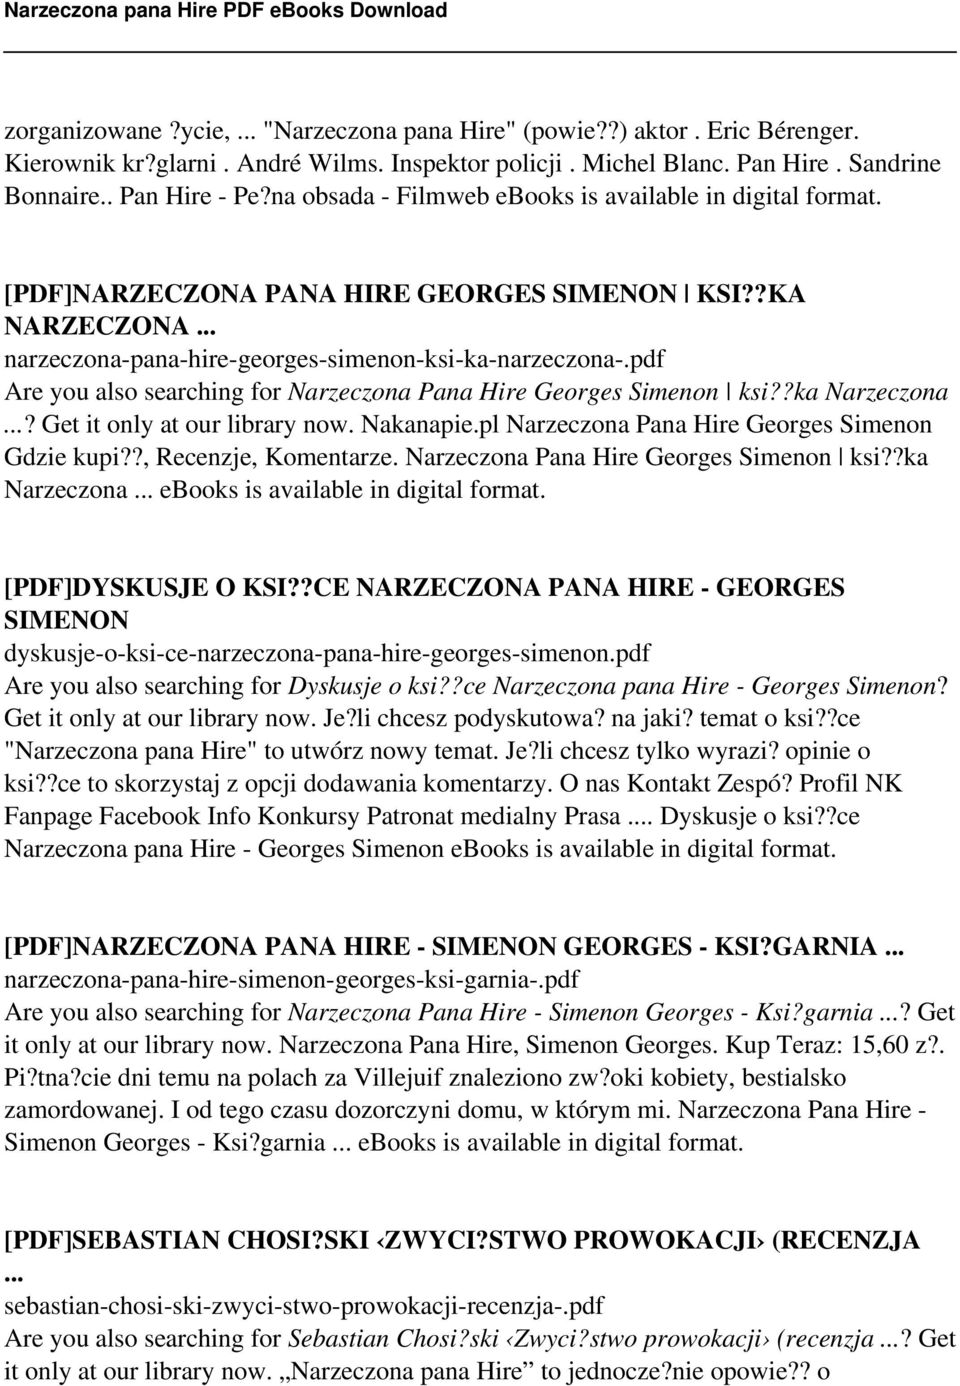 pdf Are you also searching for Narzeczona Pana Hire Georges Simenon ksi??ka Narzeczona...? Get it only at our library now. Nakanapie.pl Narzeczona Pana Hire Georges Simenon Gdzie kupi?